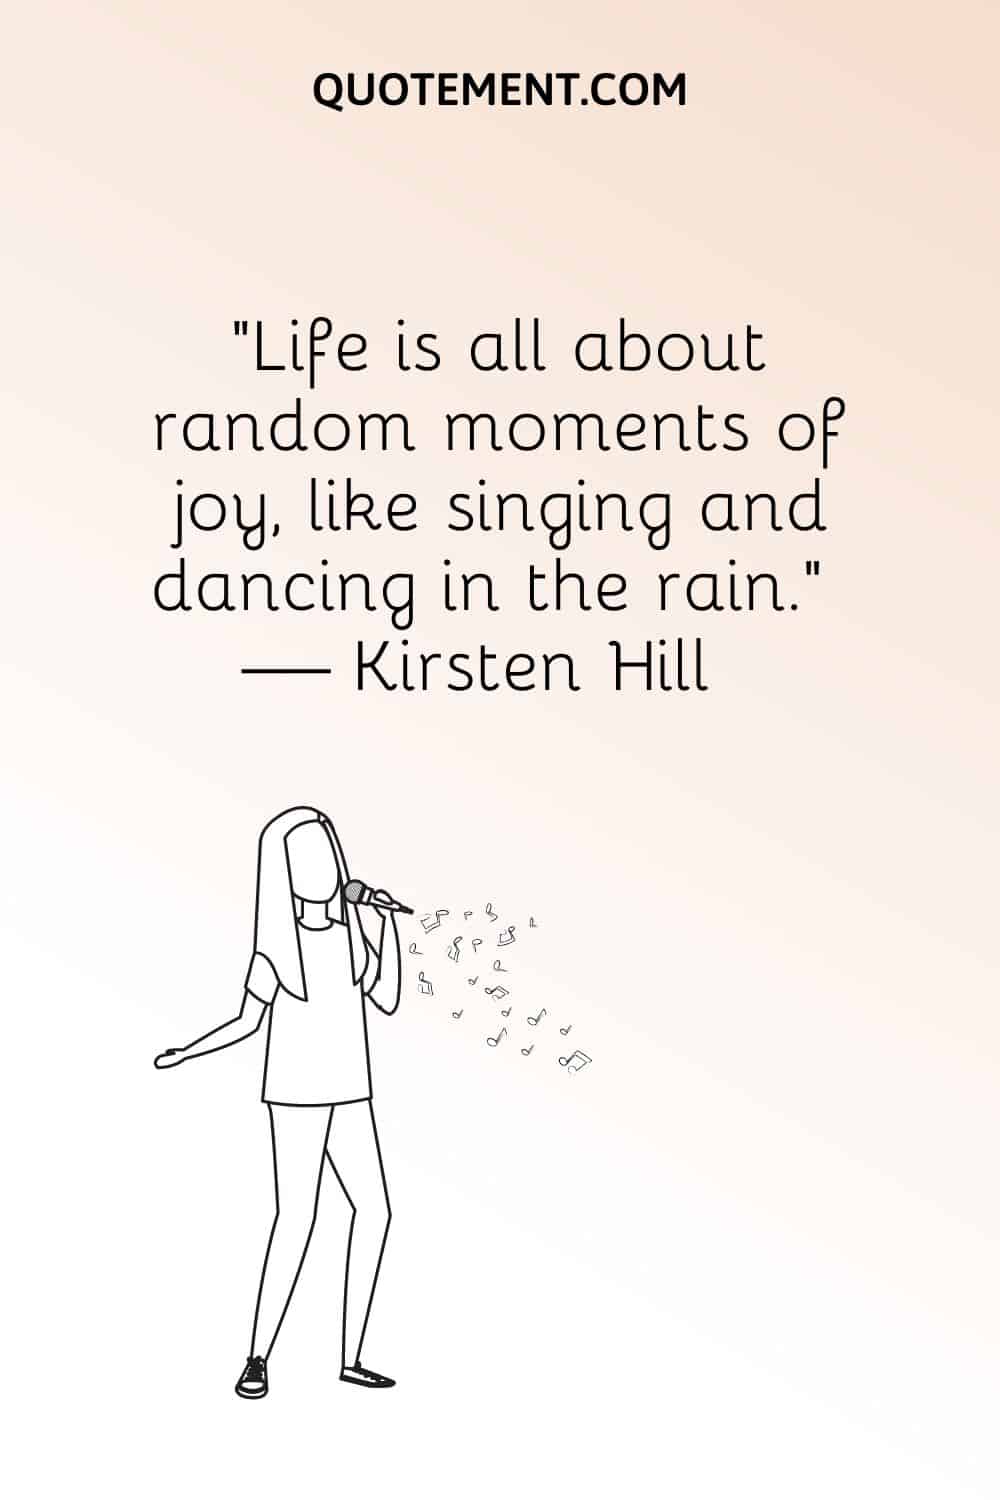 “Life is all about random moments of joy, like singing and dancing in the rain.” — Kirsten Hill